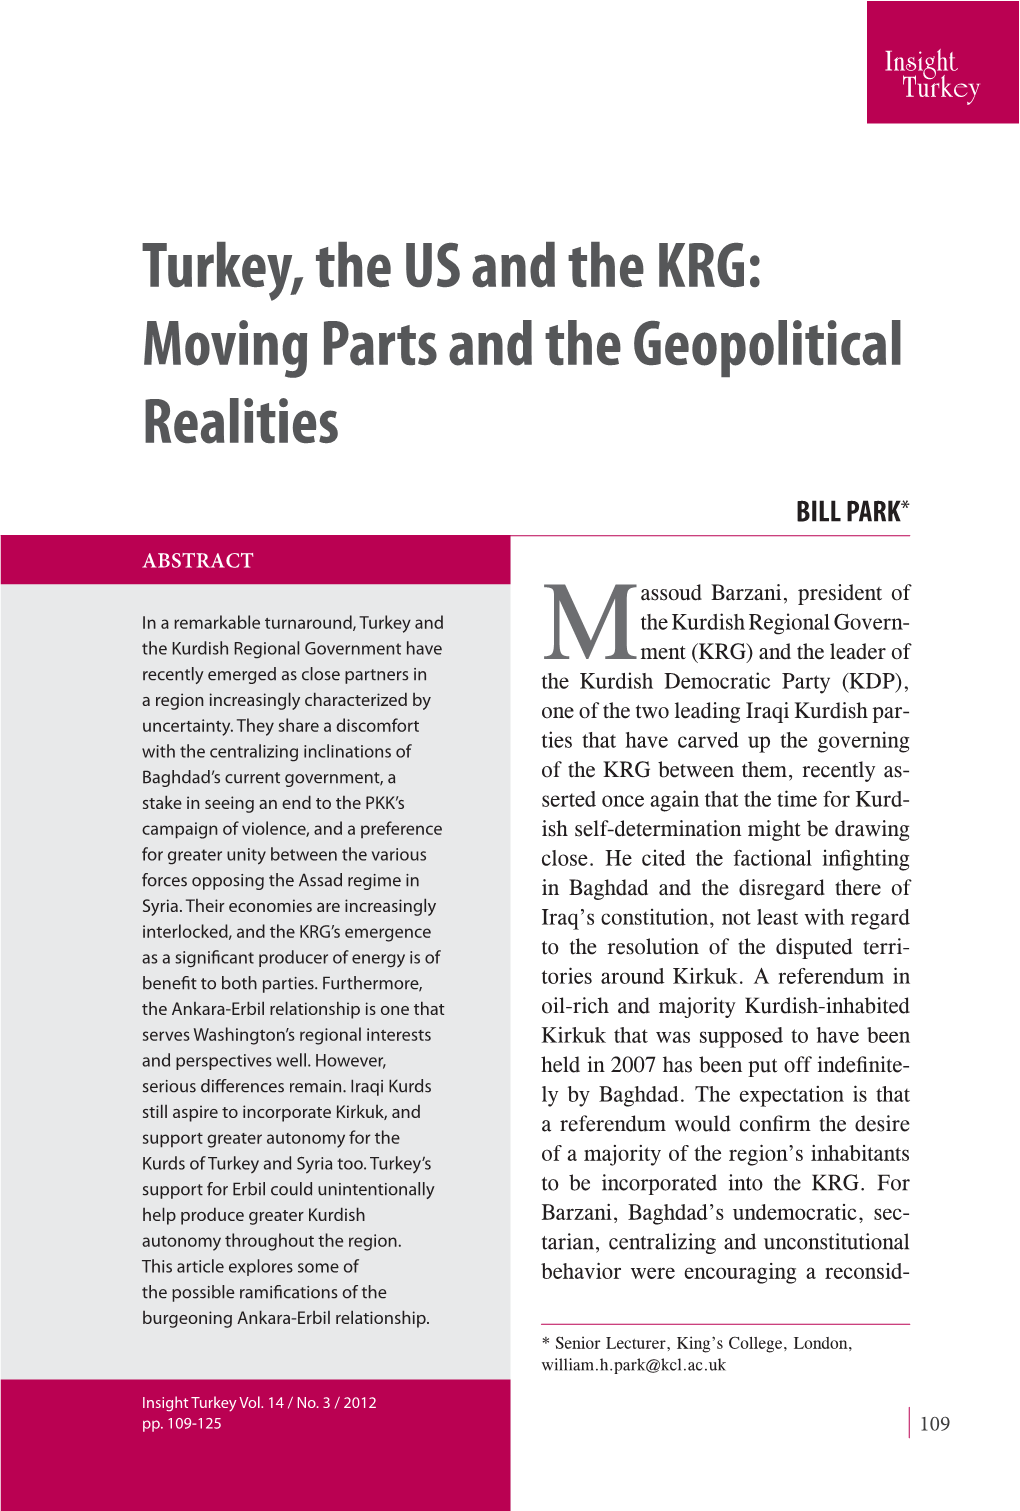 Turkey, the Us and the Krg: Moving Parts and the Geopolitical Realities